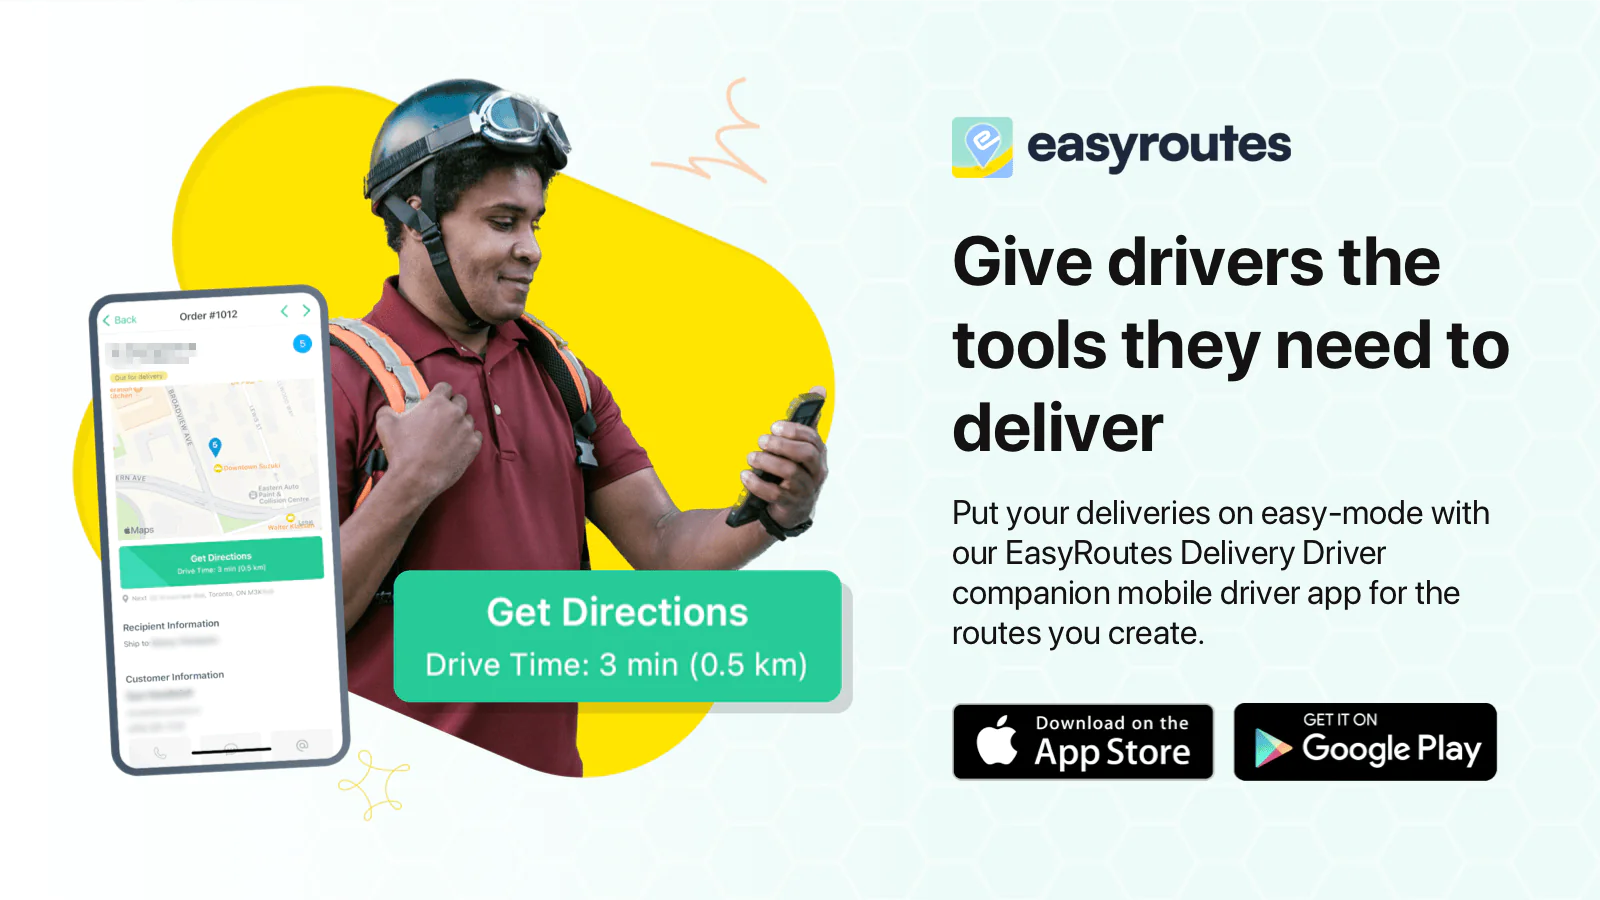 EasyRoutes Give drivers the tools they need to deliver